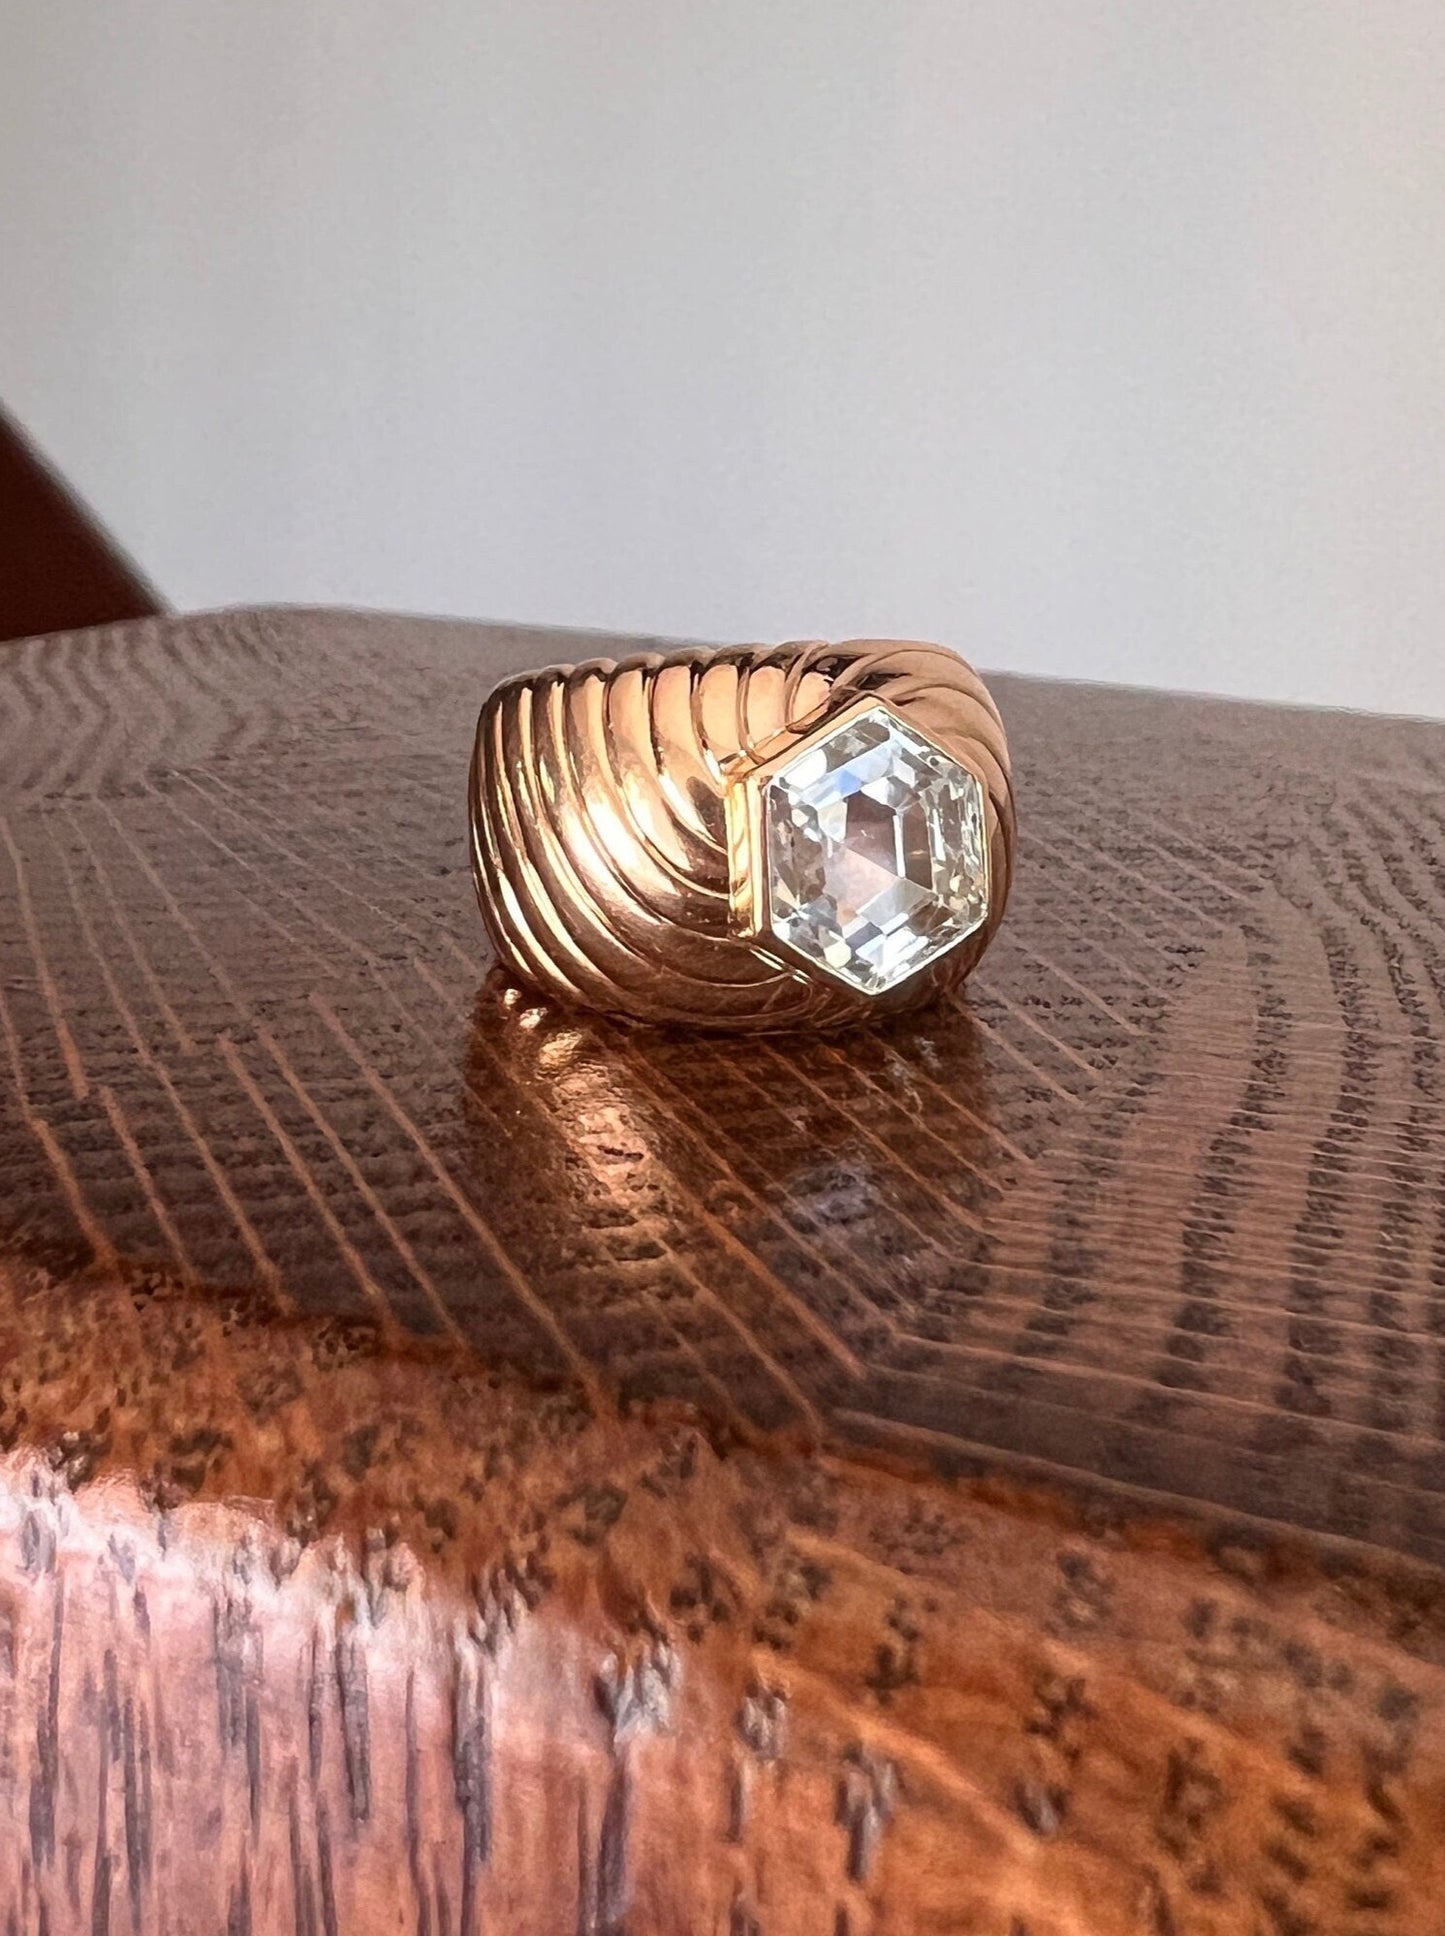 Mega HEAVY White Sapphire HEXAGON Gadroon Ring 19g 18k Gold French Vintage Chunky 13mm Wide Band Stacker Swirled Lined Geometric Domed Gift